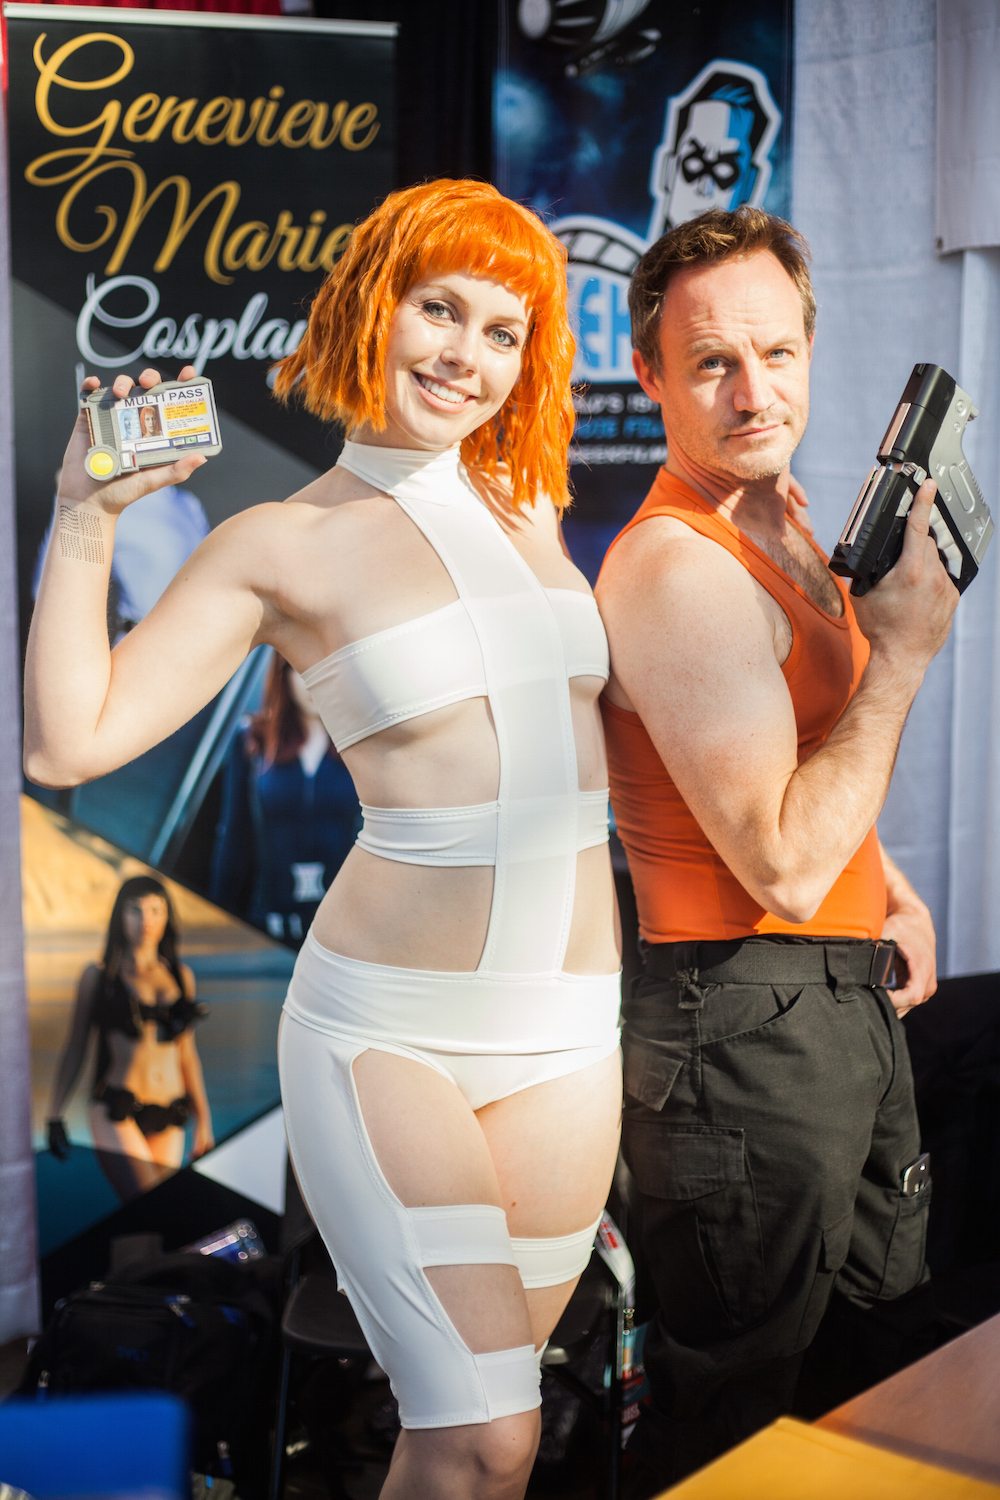 "Multipass" Leeloo and Korben Dallas from The Fifth Element